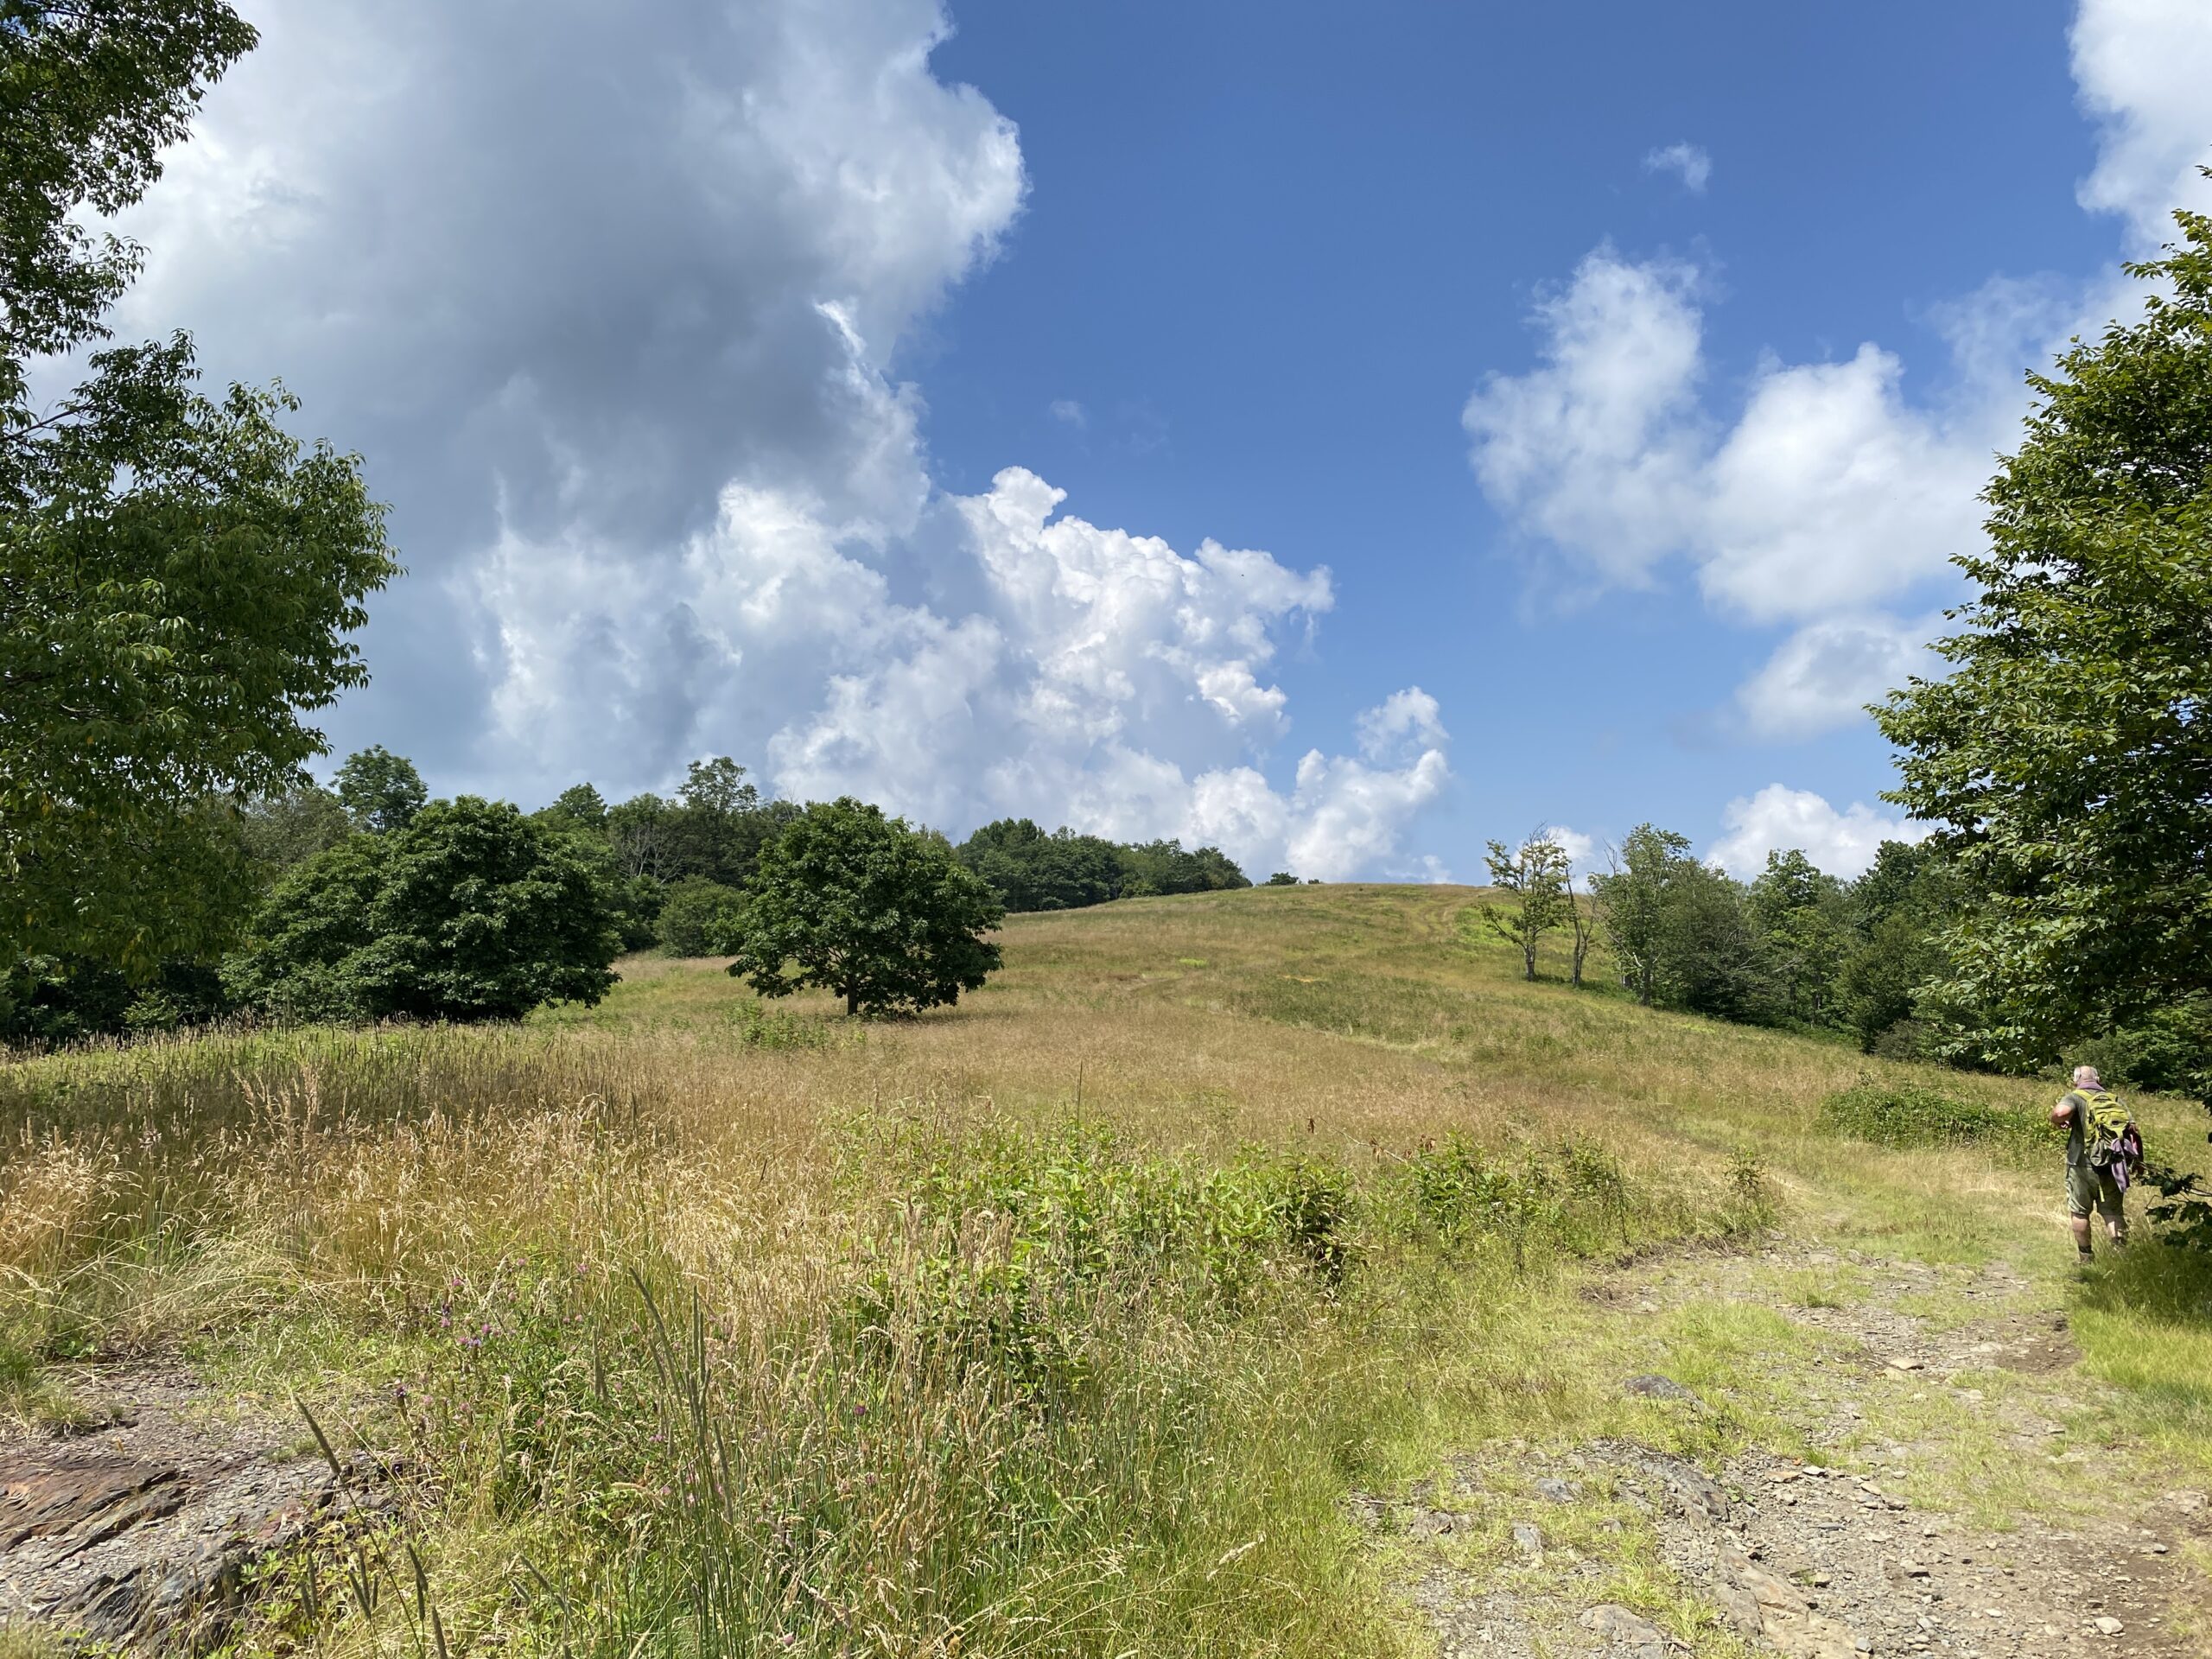 Small trees and rocky outcrops dot the lush grassland of Whiggs Meadow prairie in Tennessee. A trail winds up its rolling slopes. Clouds billow across open sky.